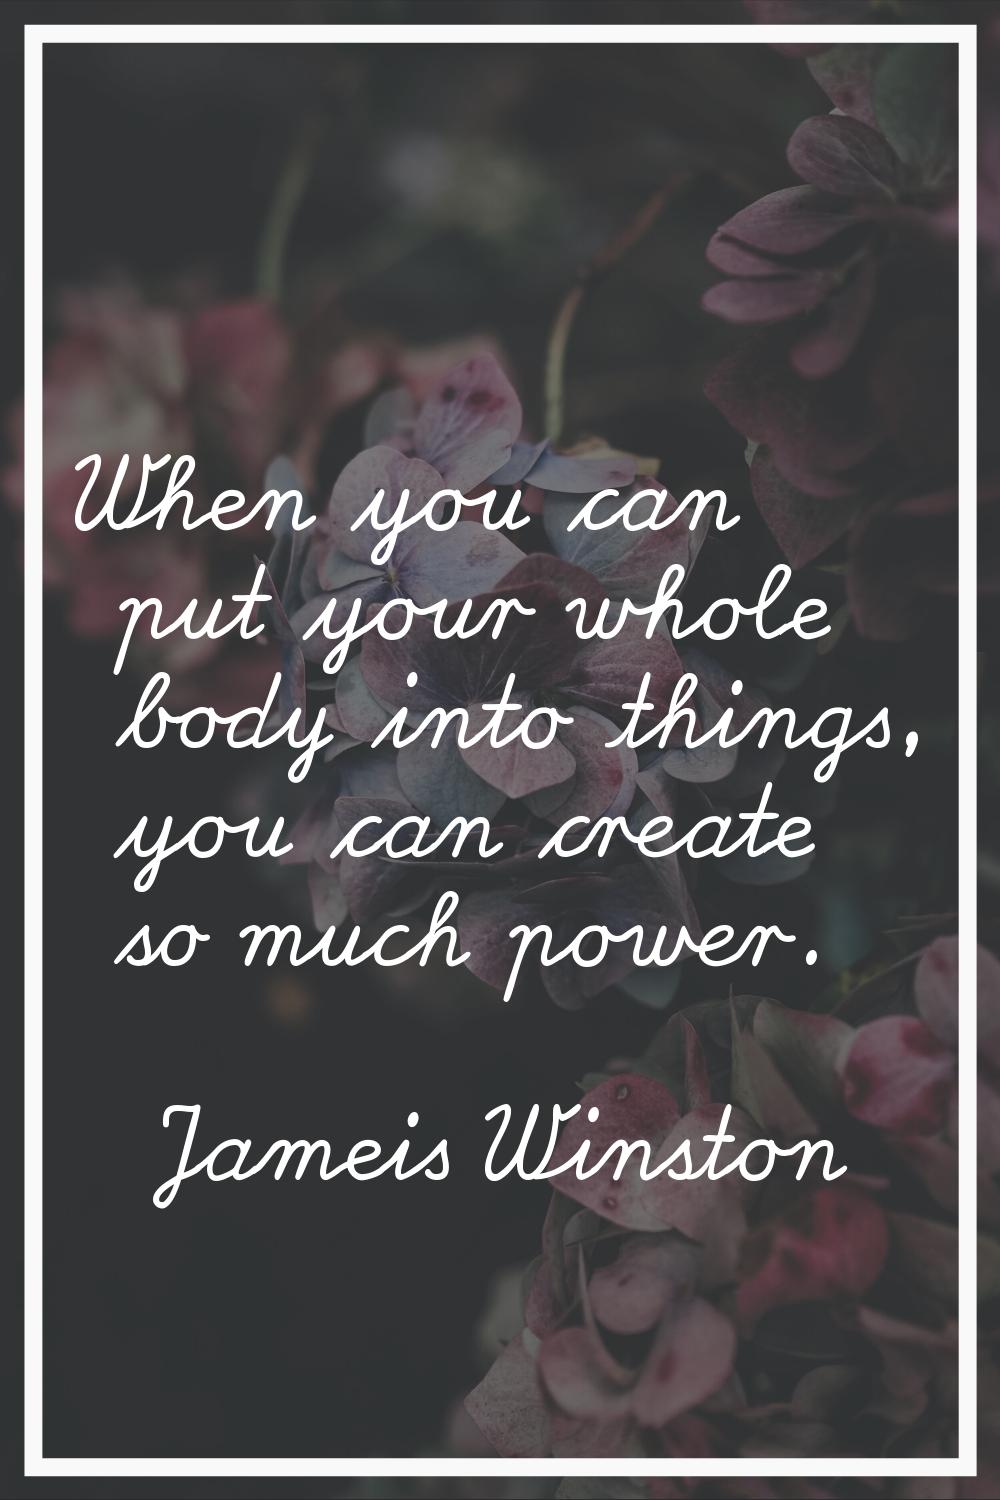 When you can put your whole body into things, you can create so much power.